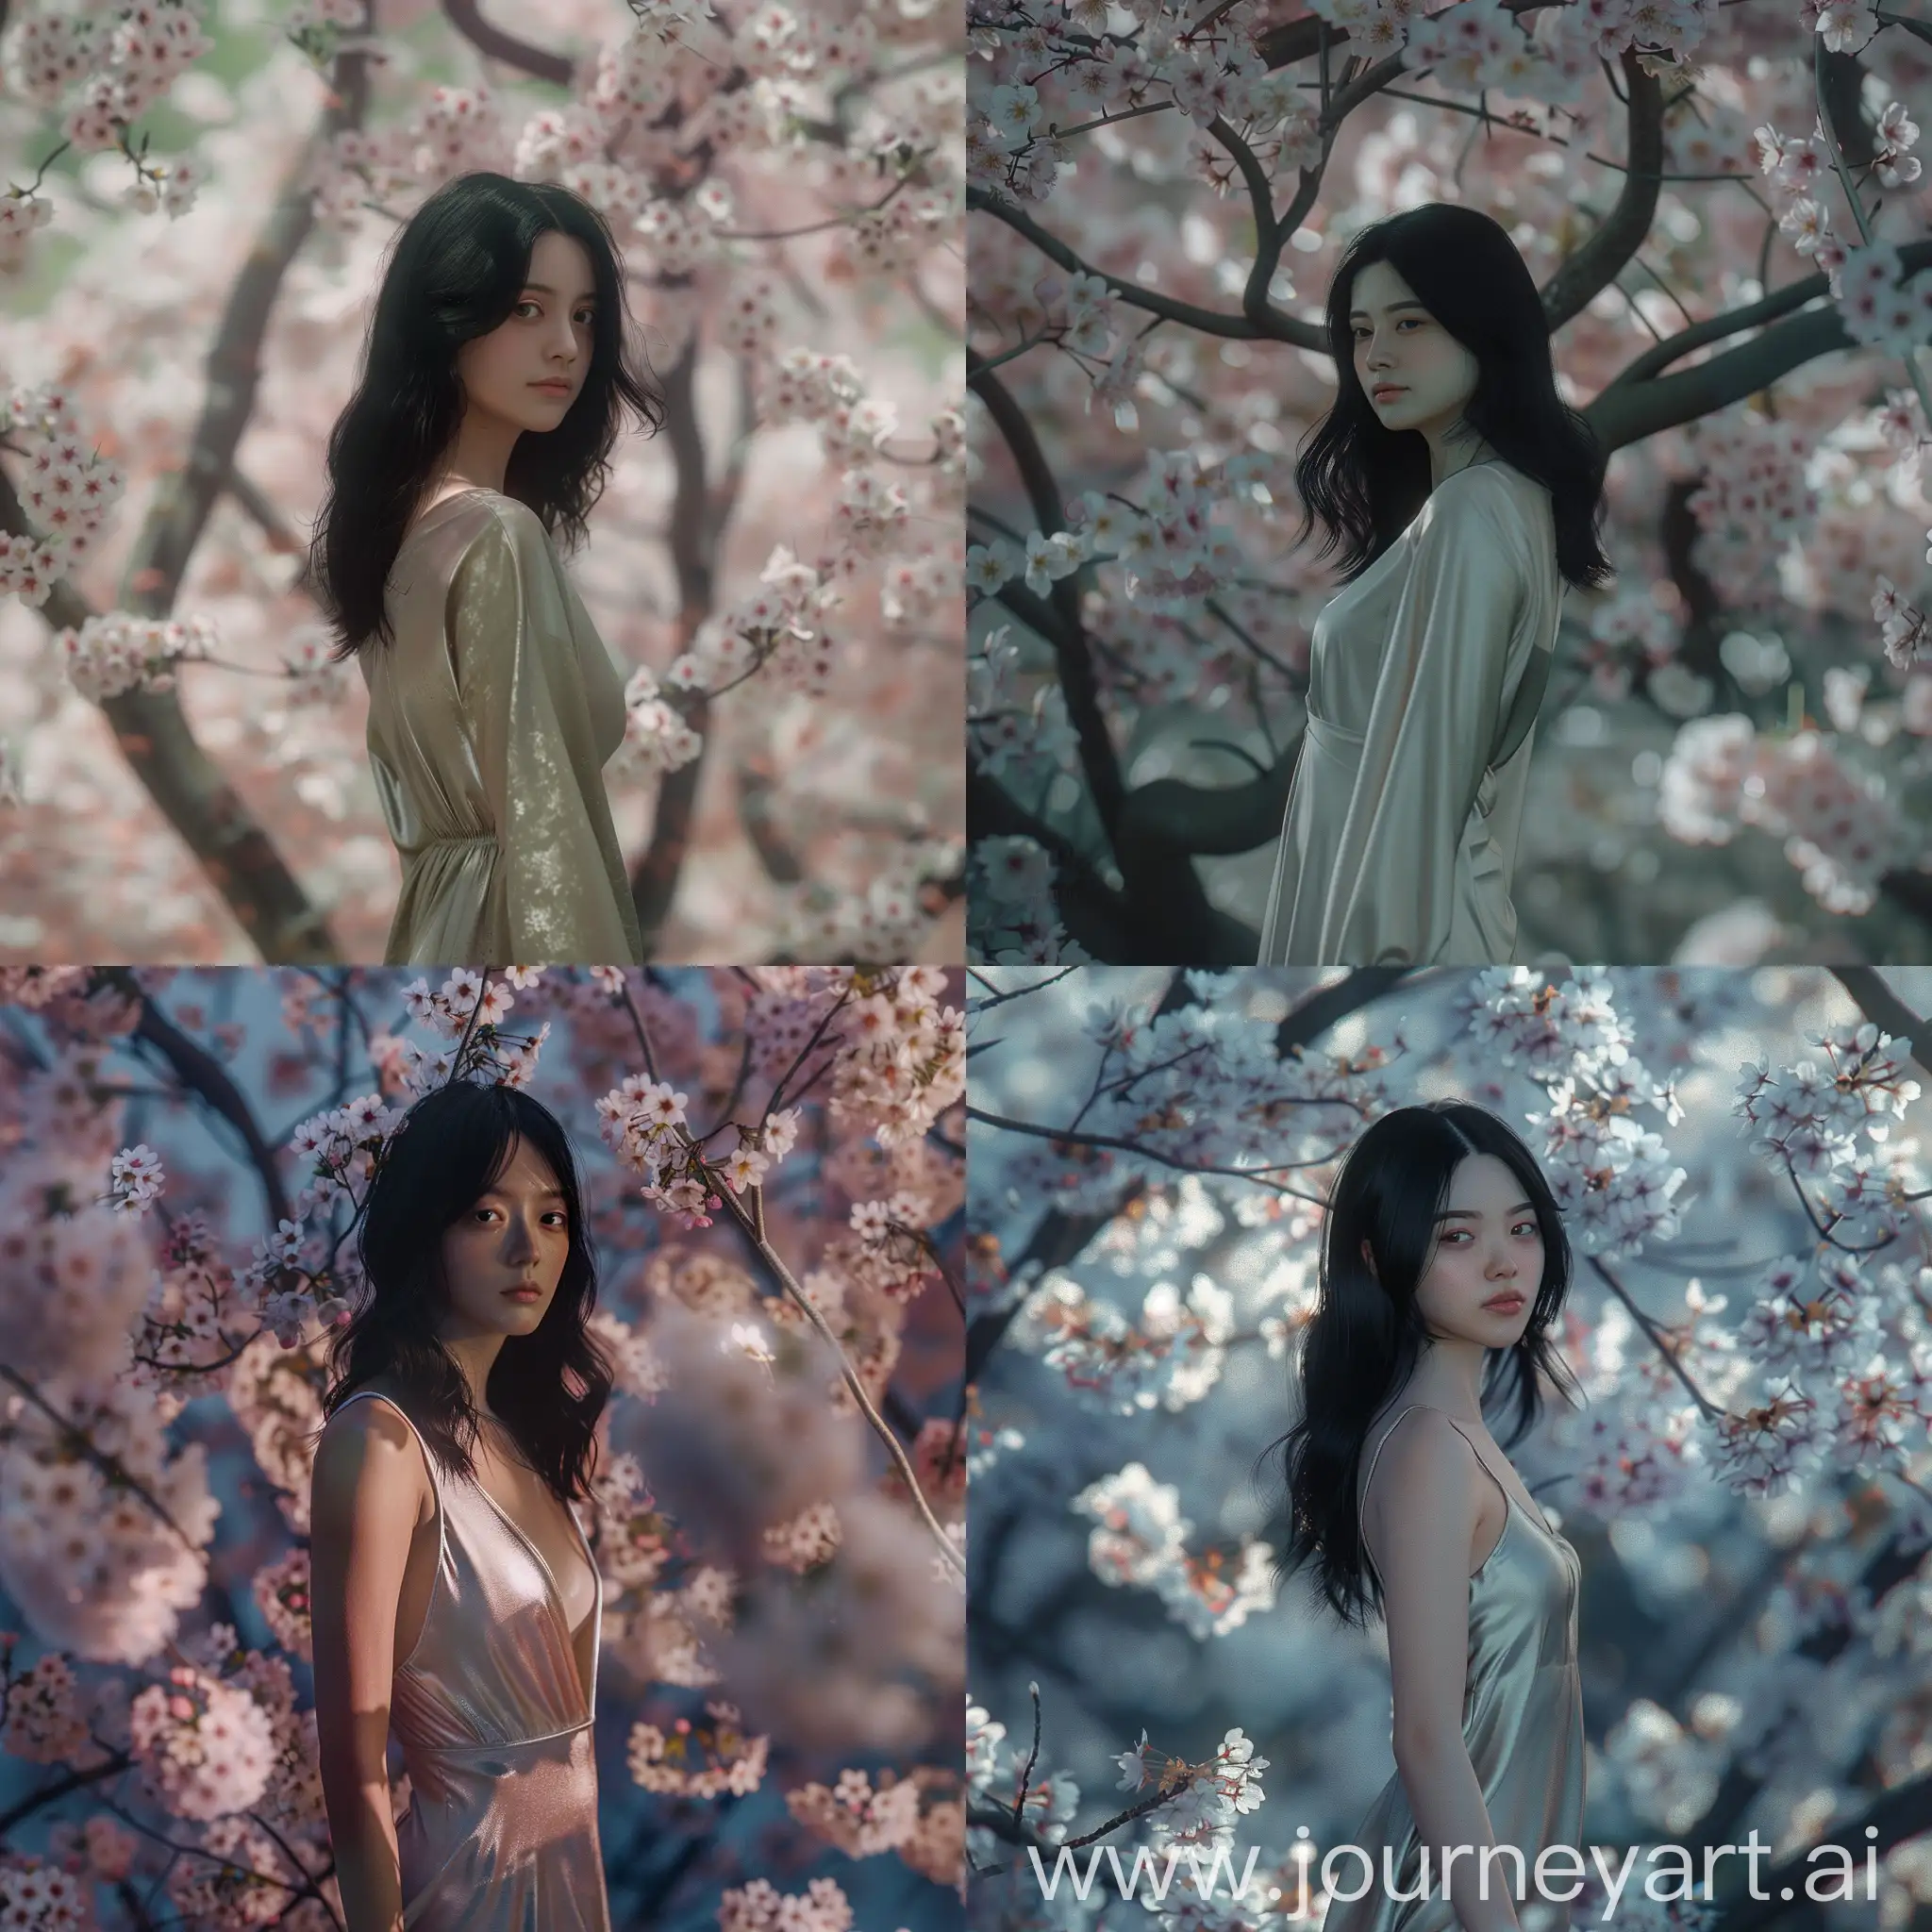 Ethereal-Beauty-Amidst-Cherry-Blossoms-30YearOld-Woman-in-Silk-Summer-Dress